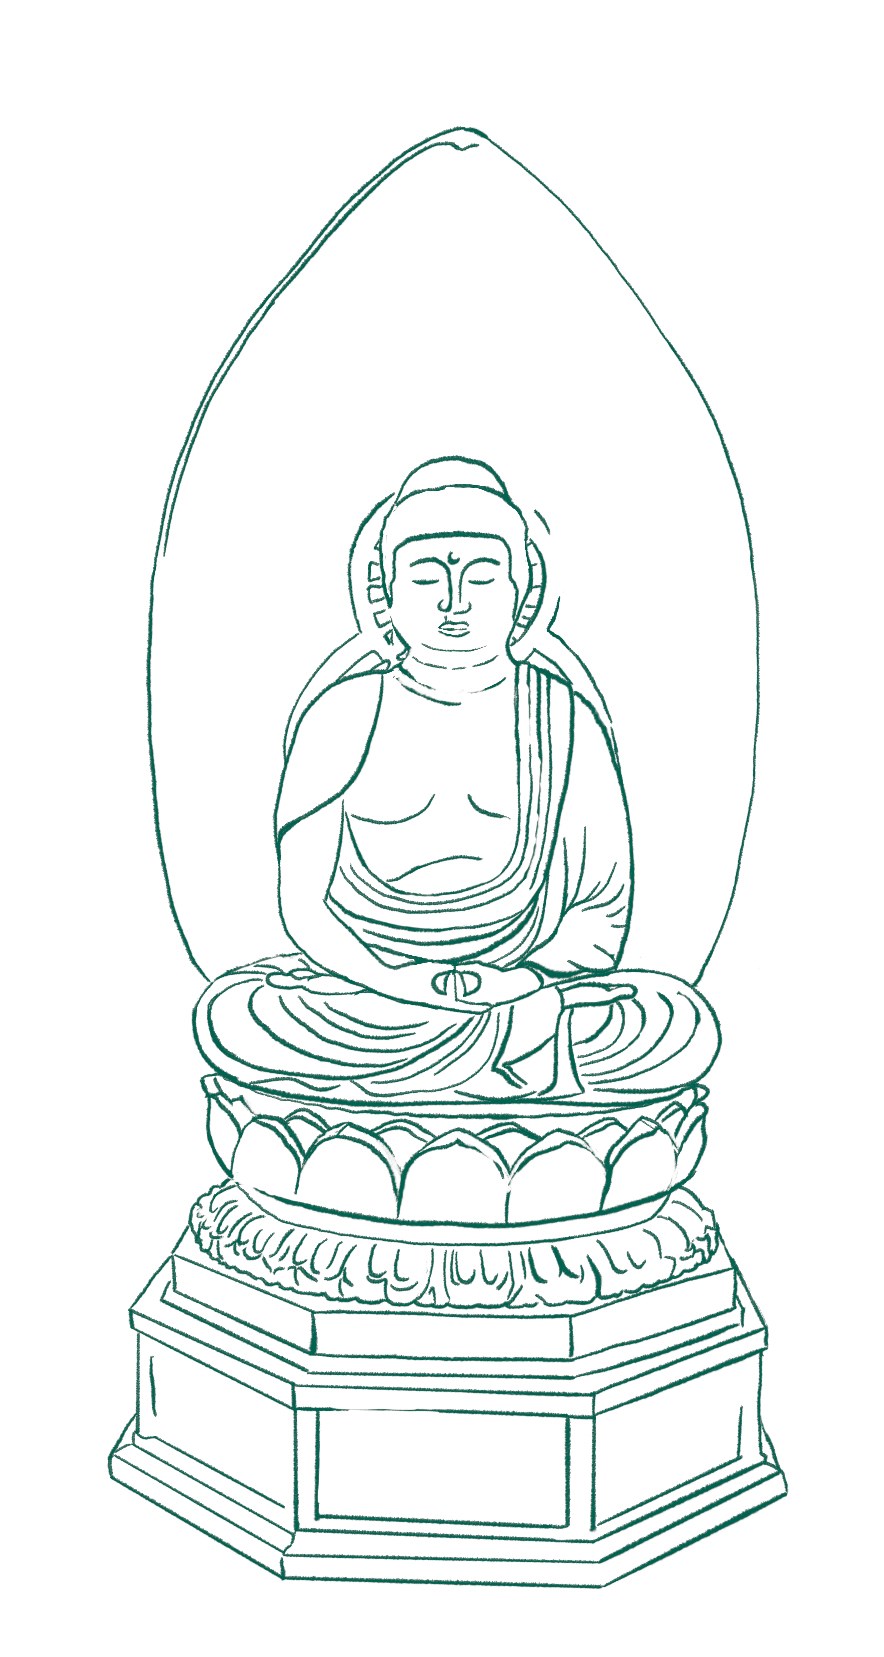 Line drawing of a Japanese statue of the Buddha Amida.